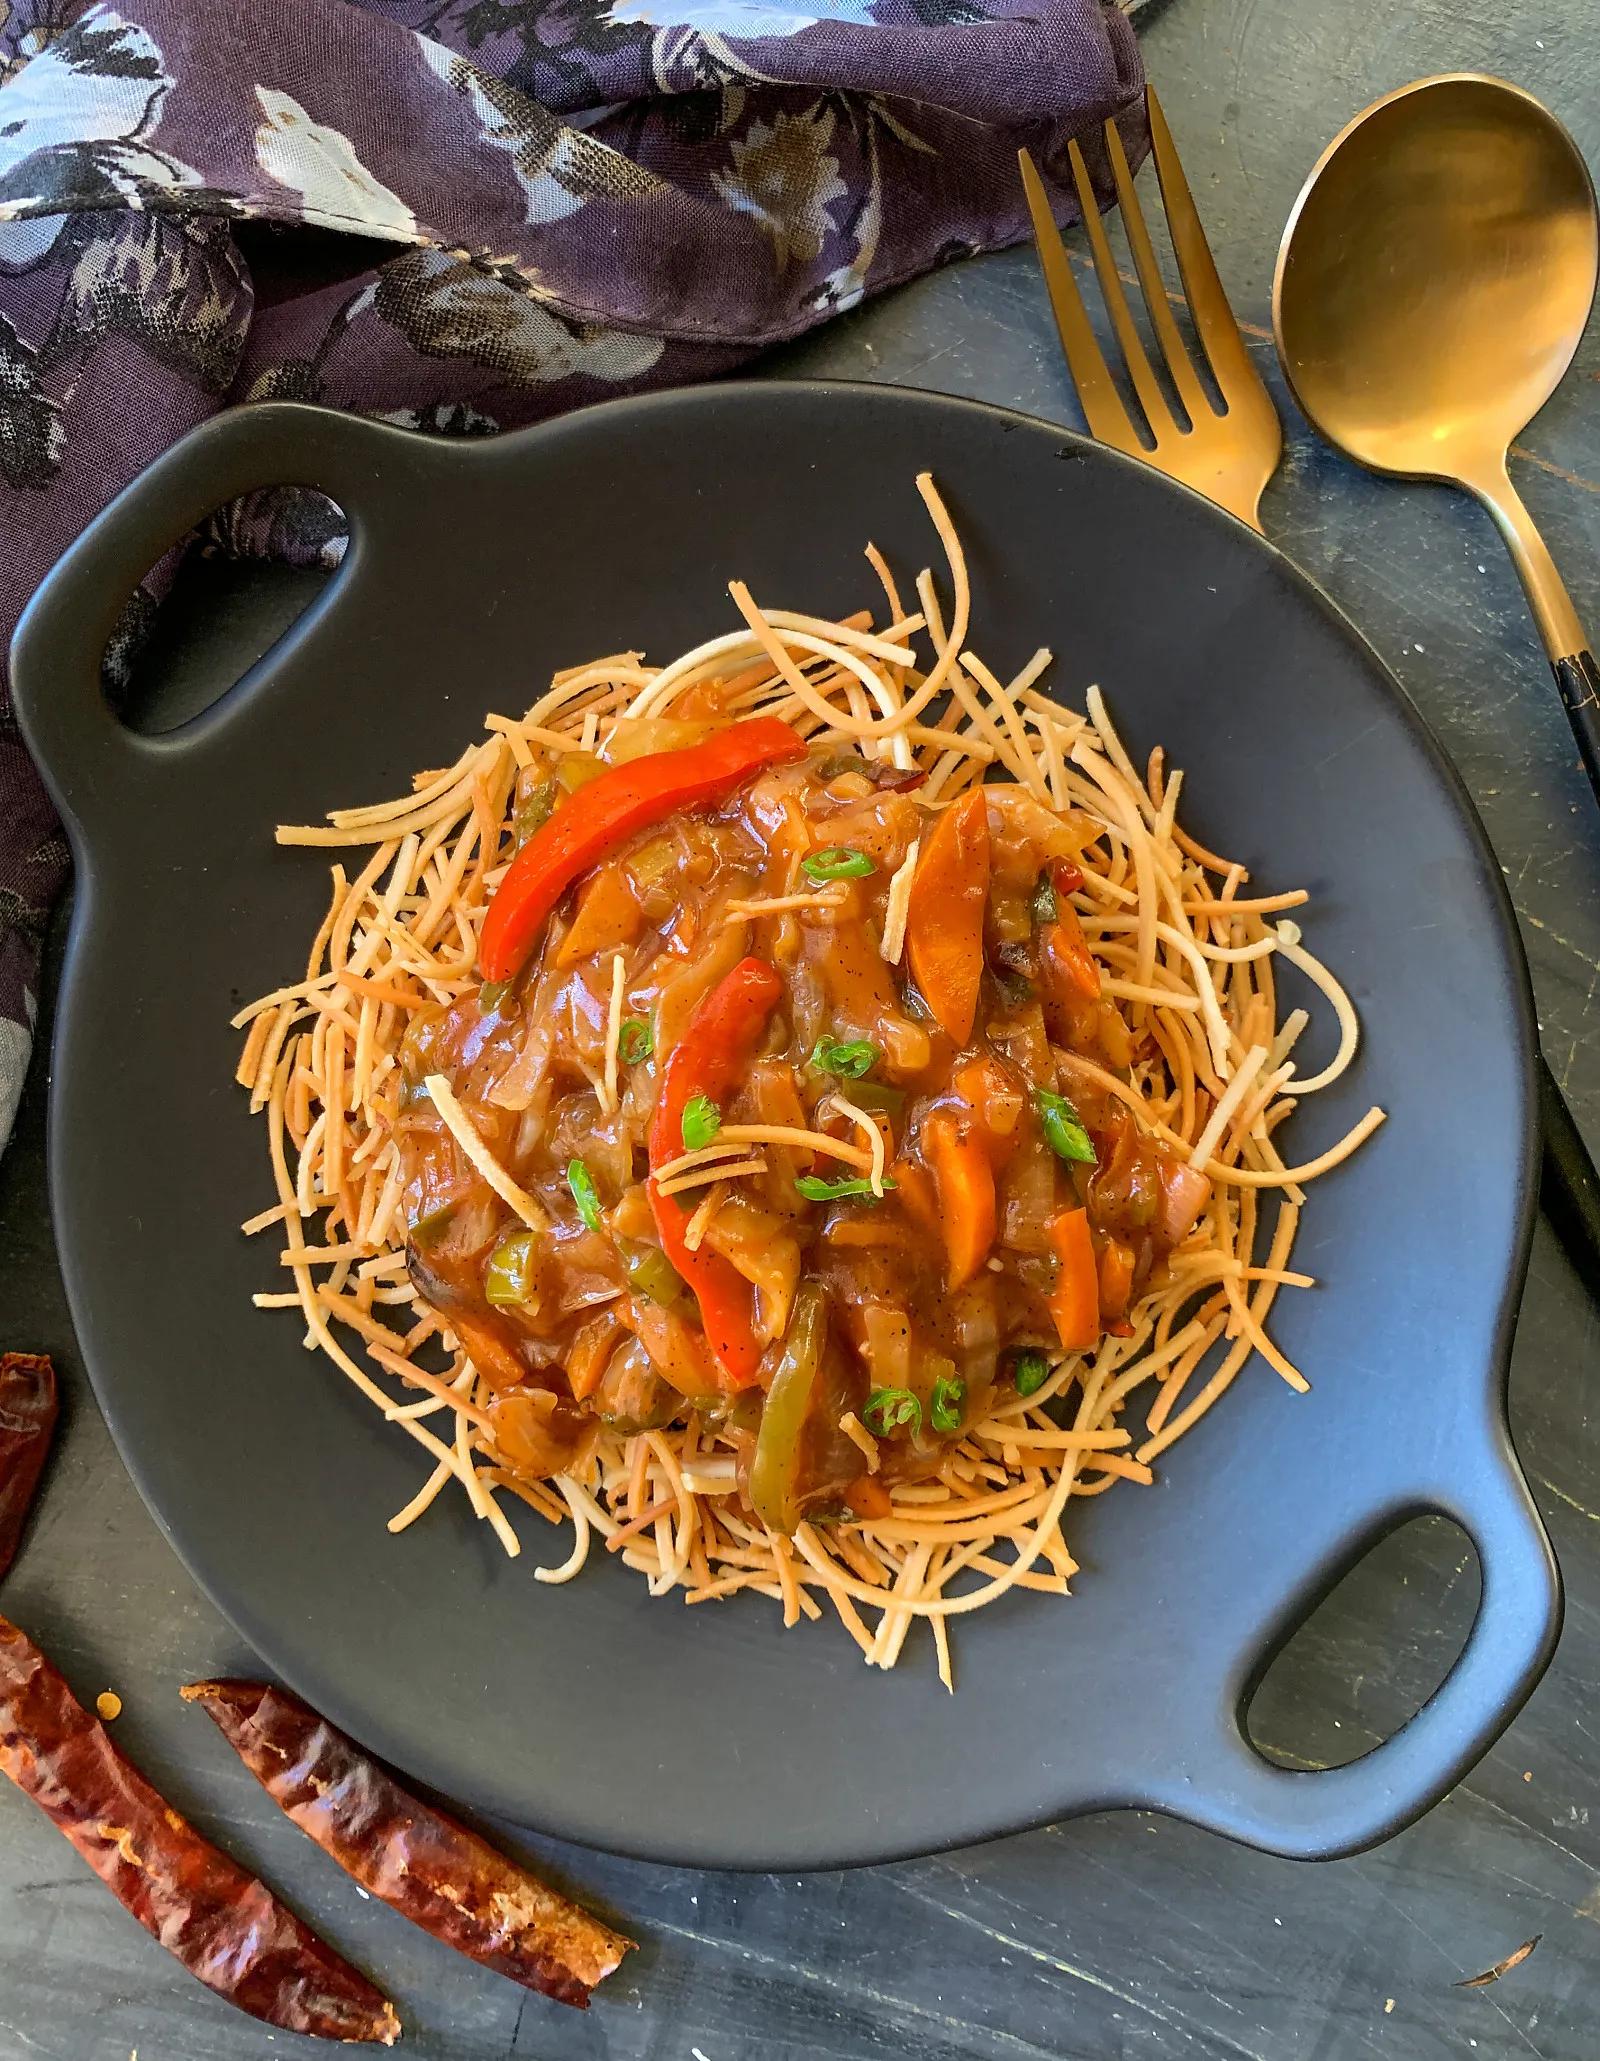 American Chop Suey Recipe - Crispy Noodles Topped With Sweet and Sour ...